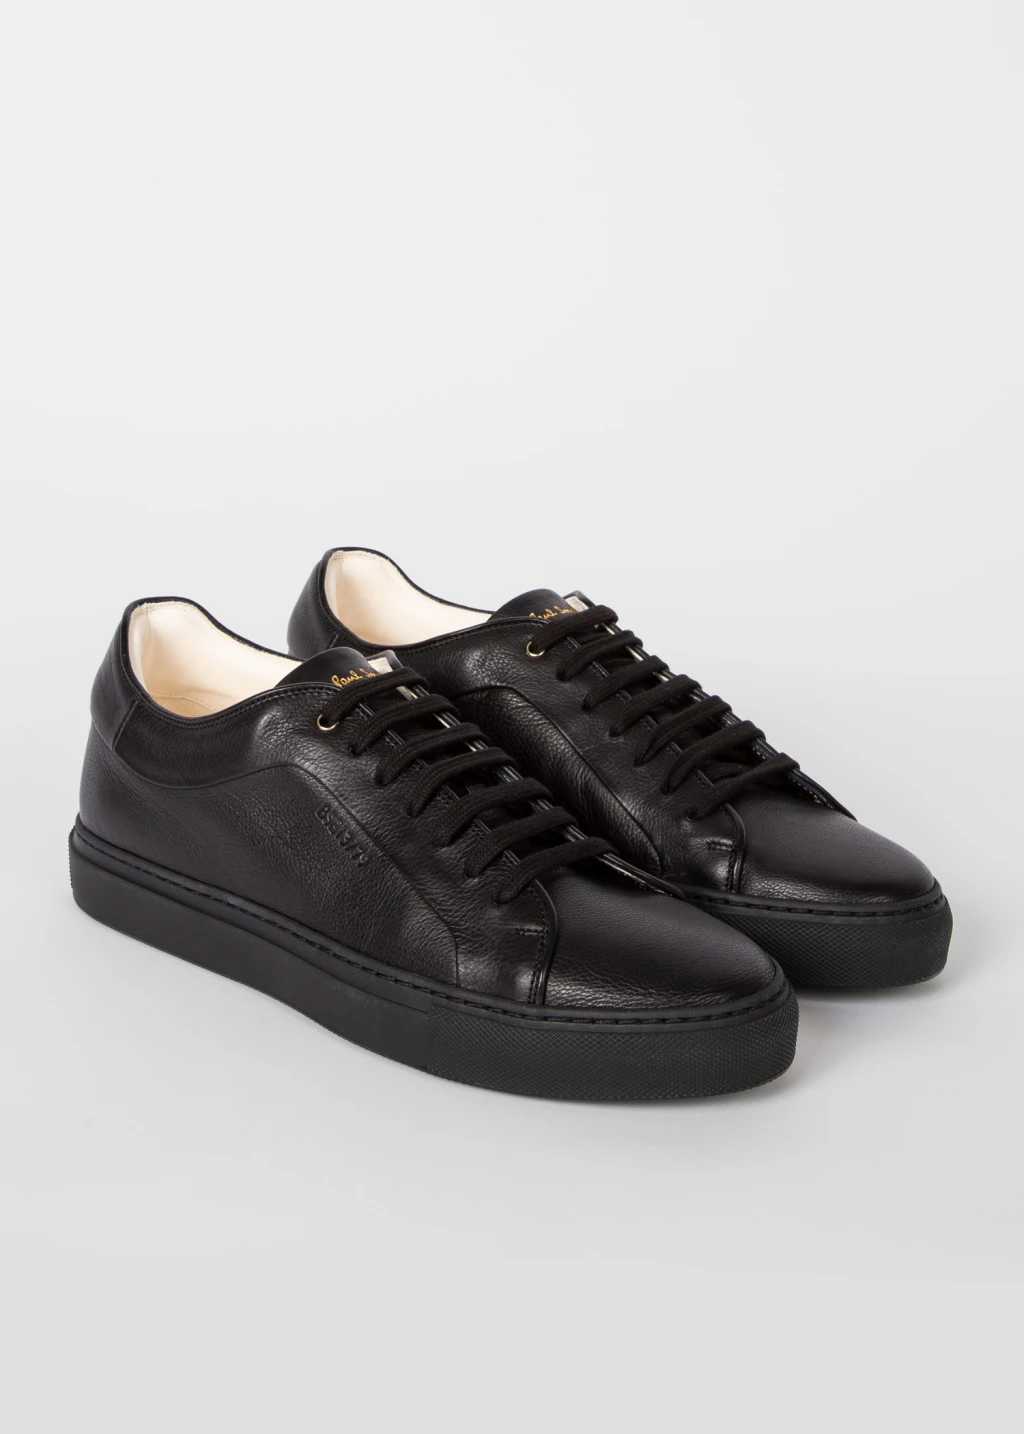 Men's Black Leather Eco 'Basso' Trainers